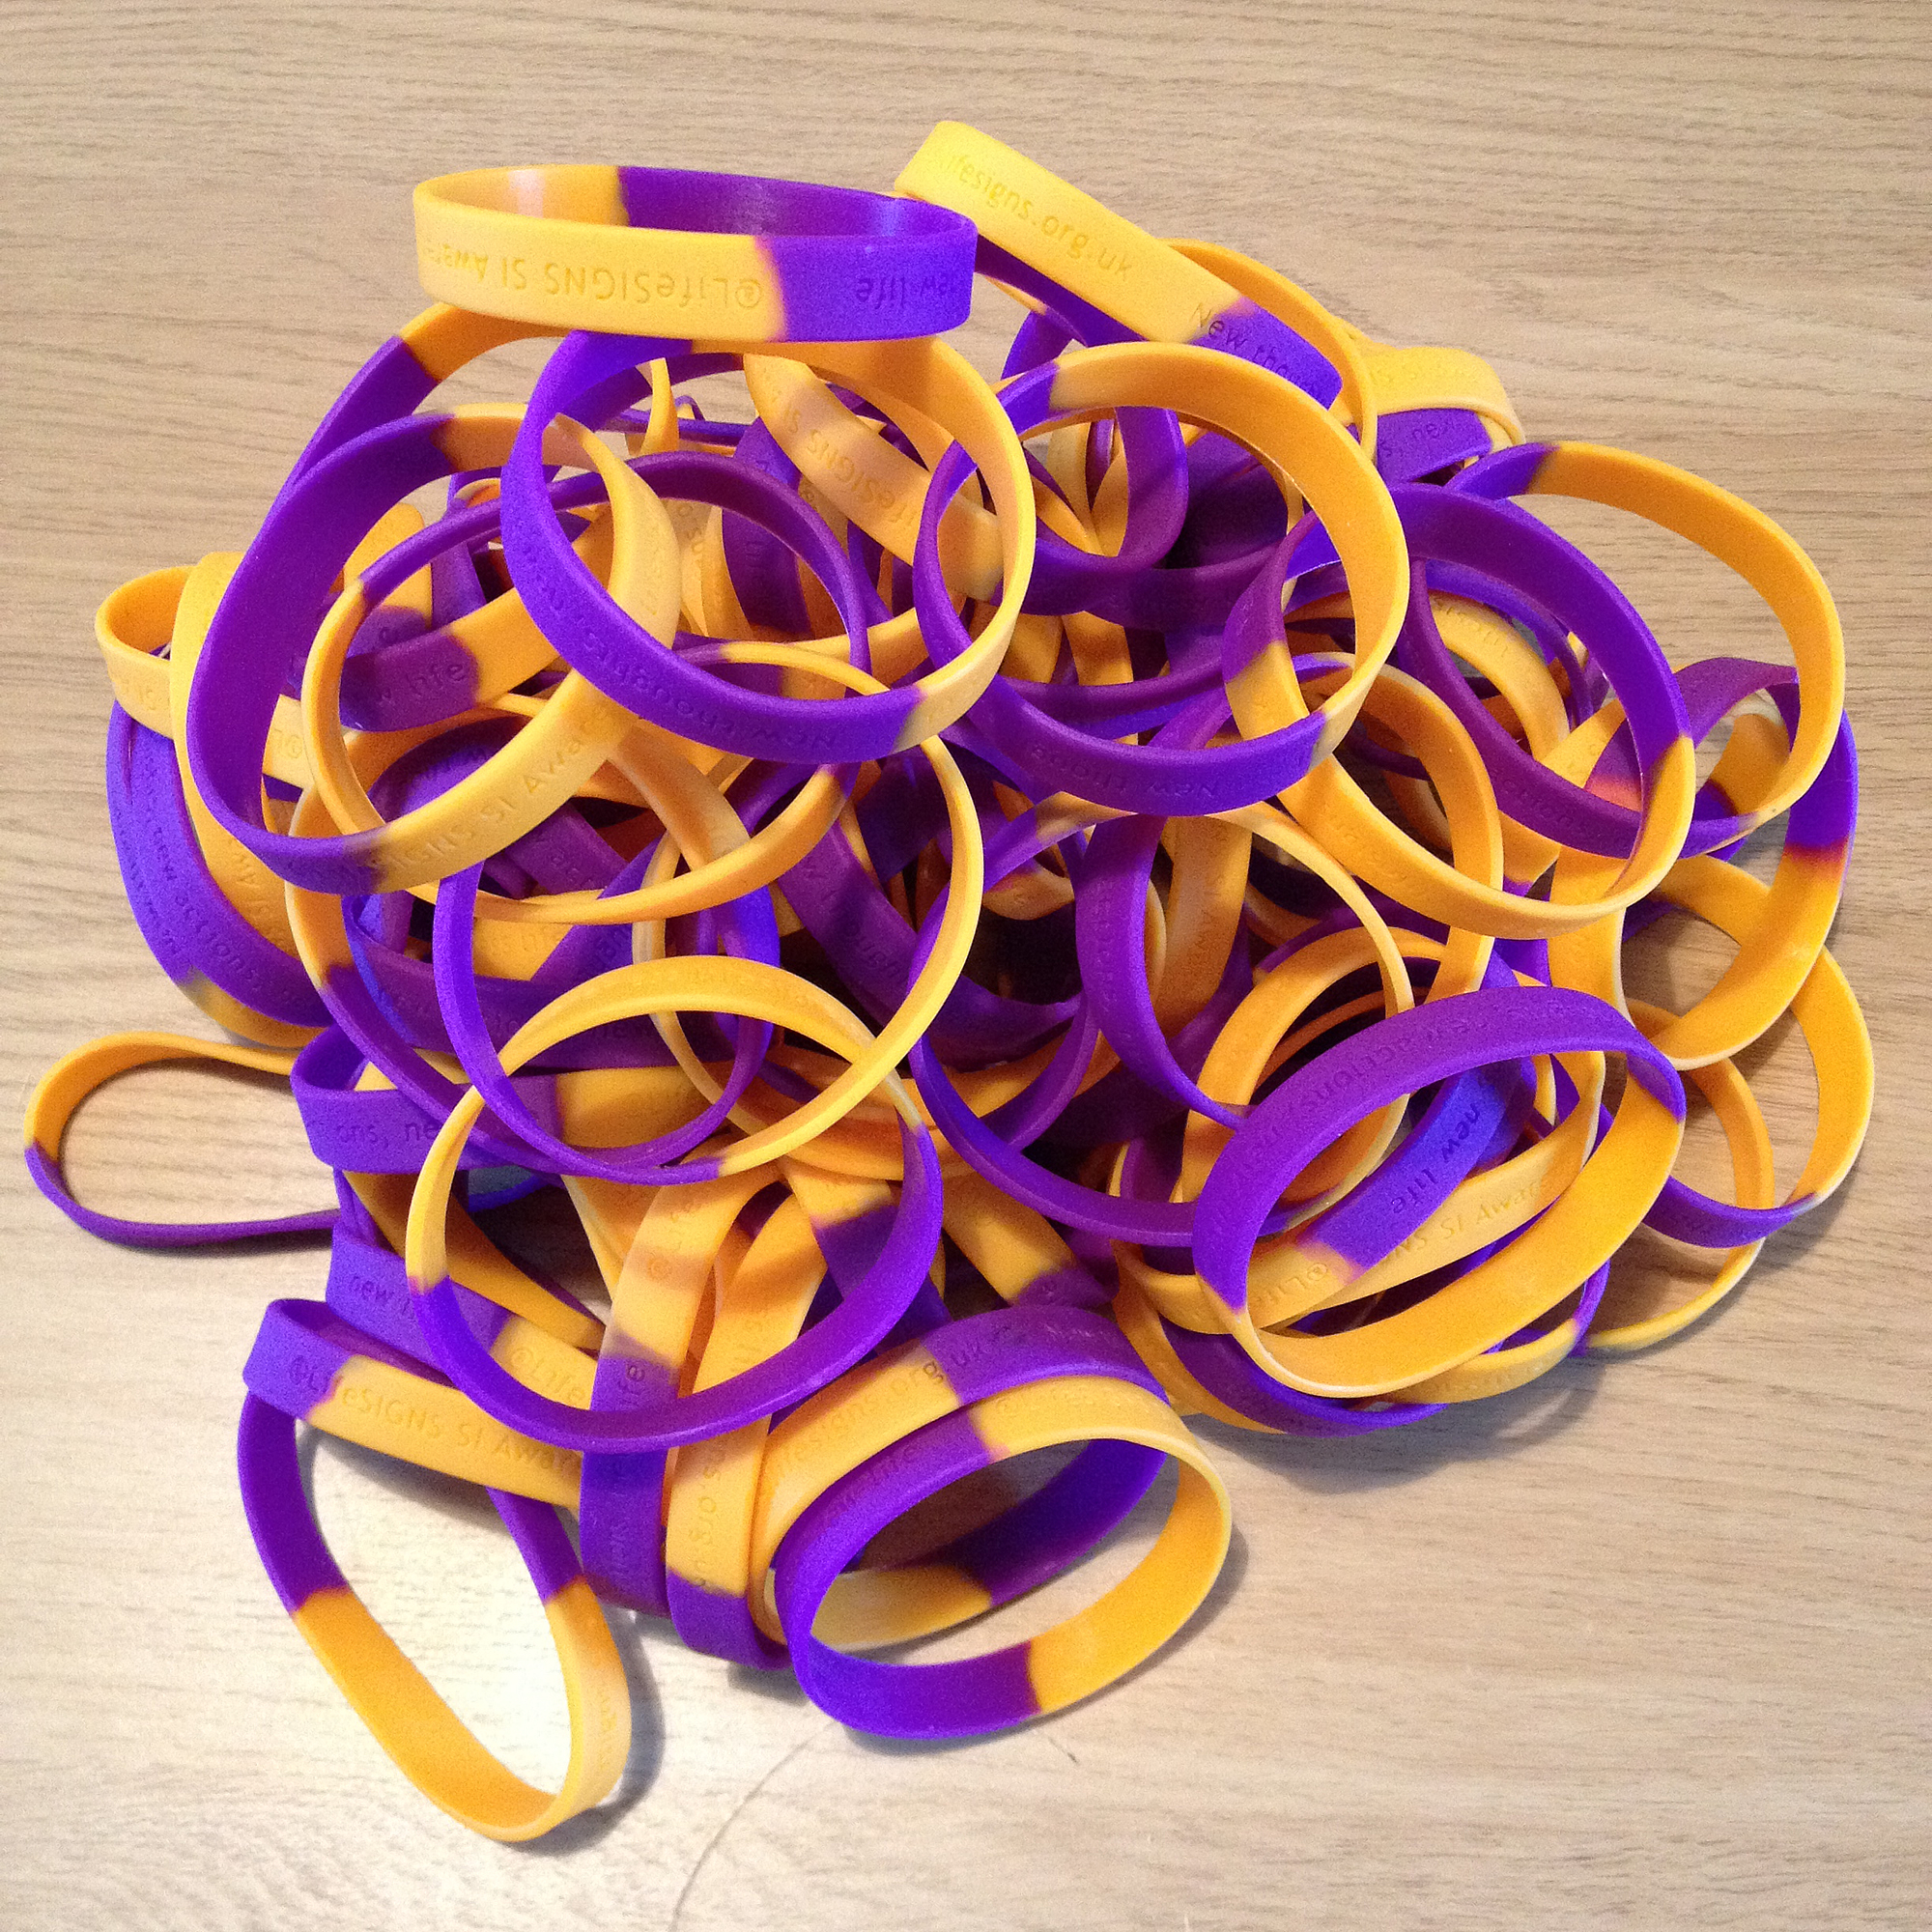 New self-injury awareness wristbands now available